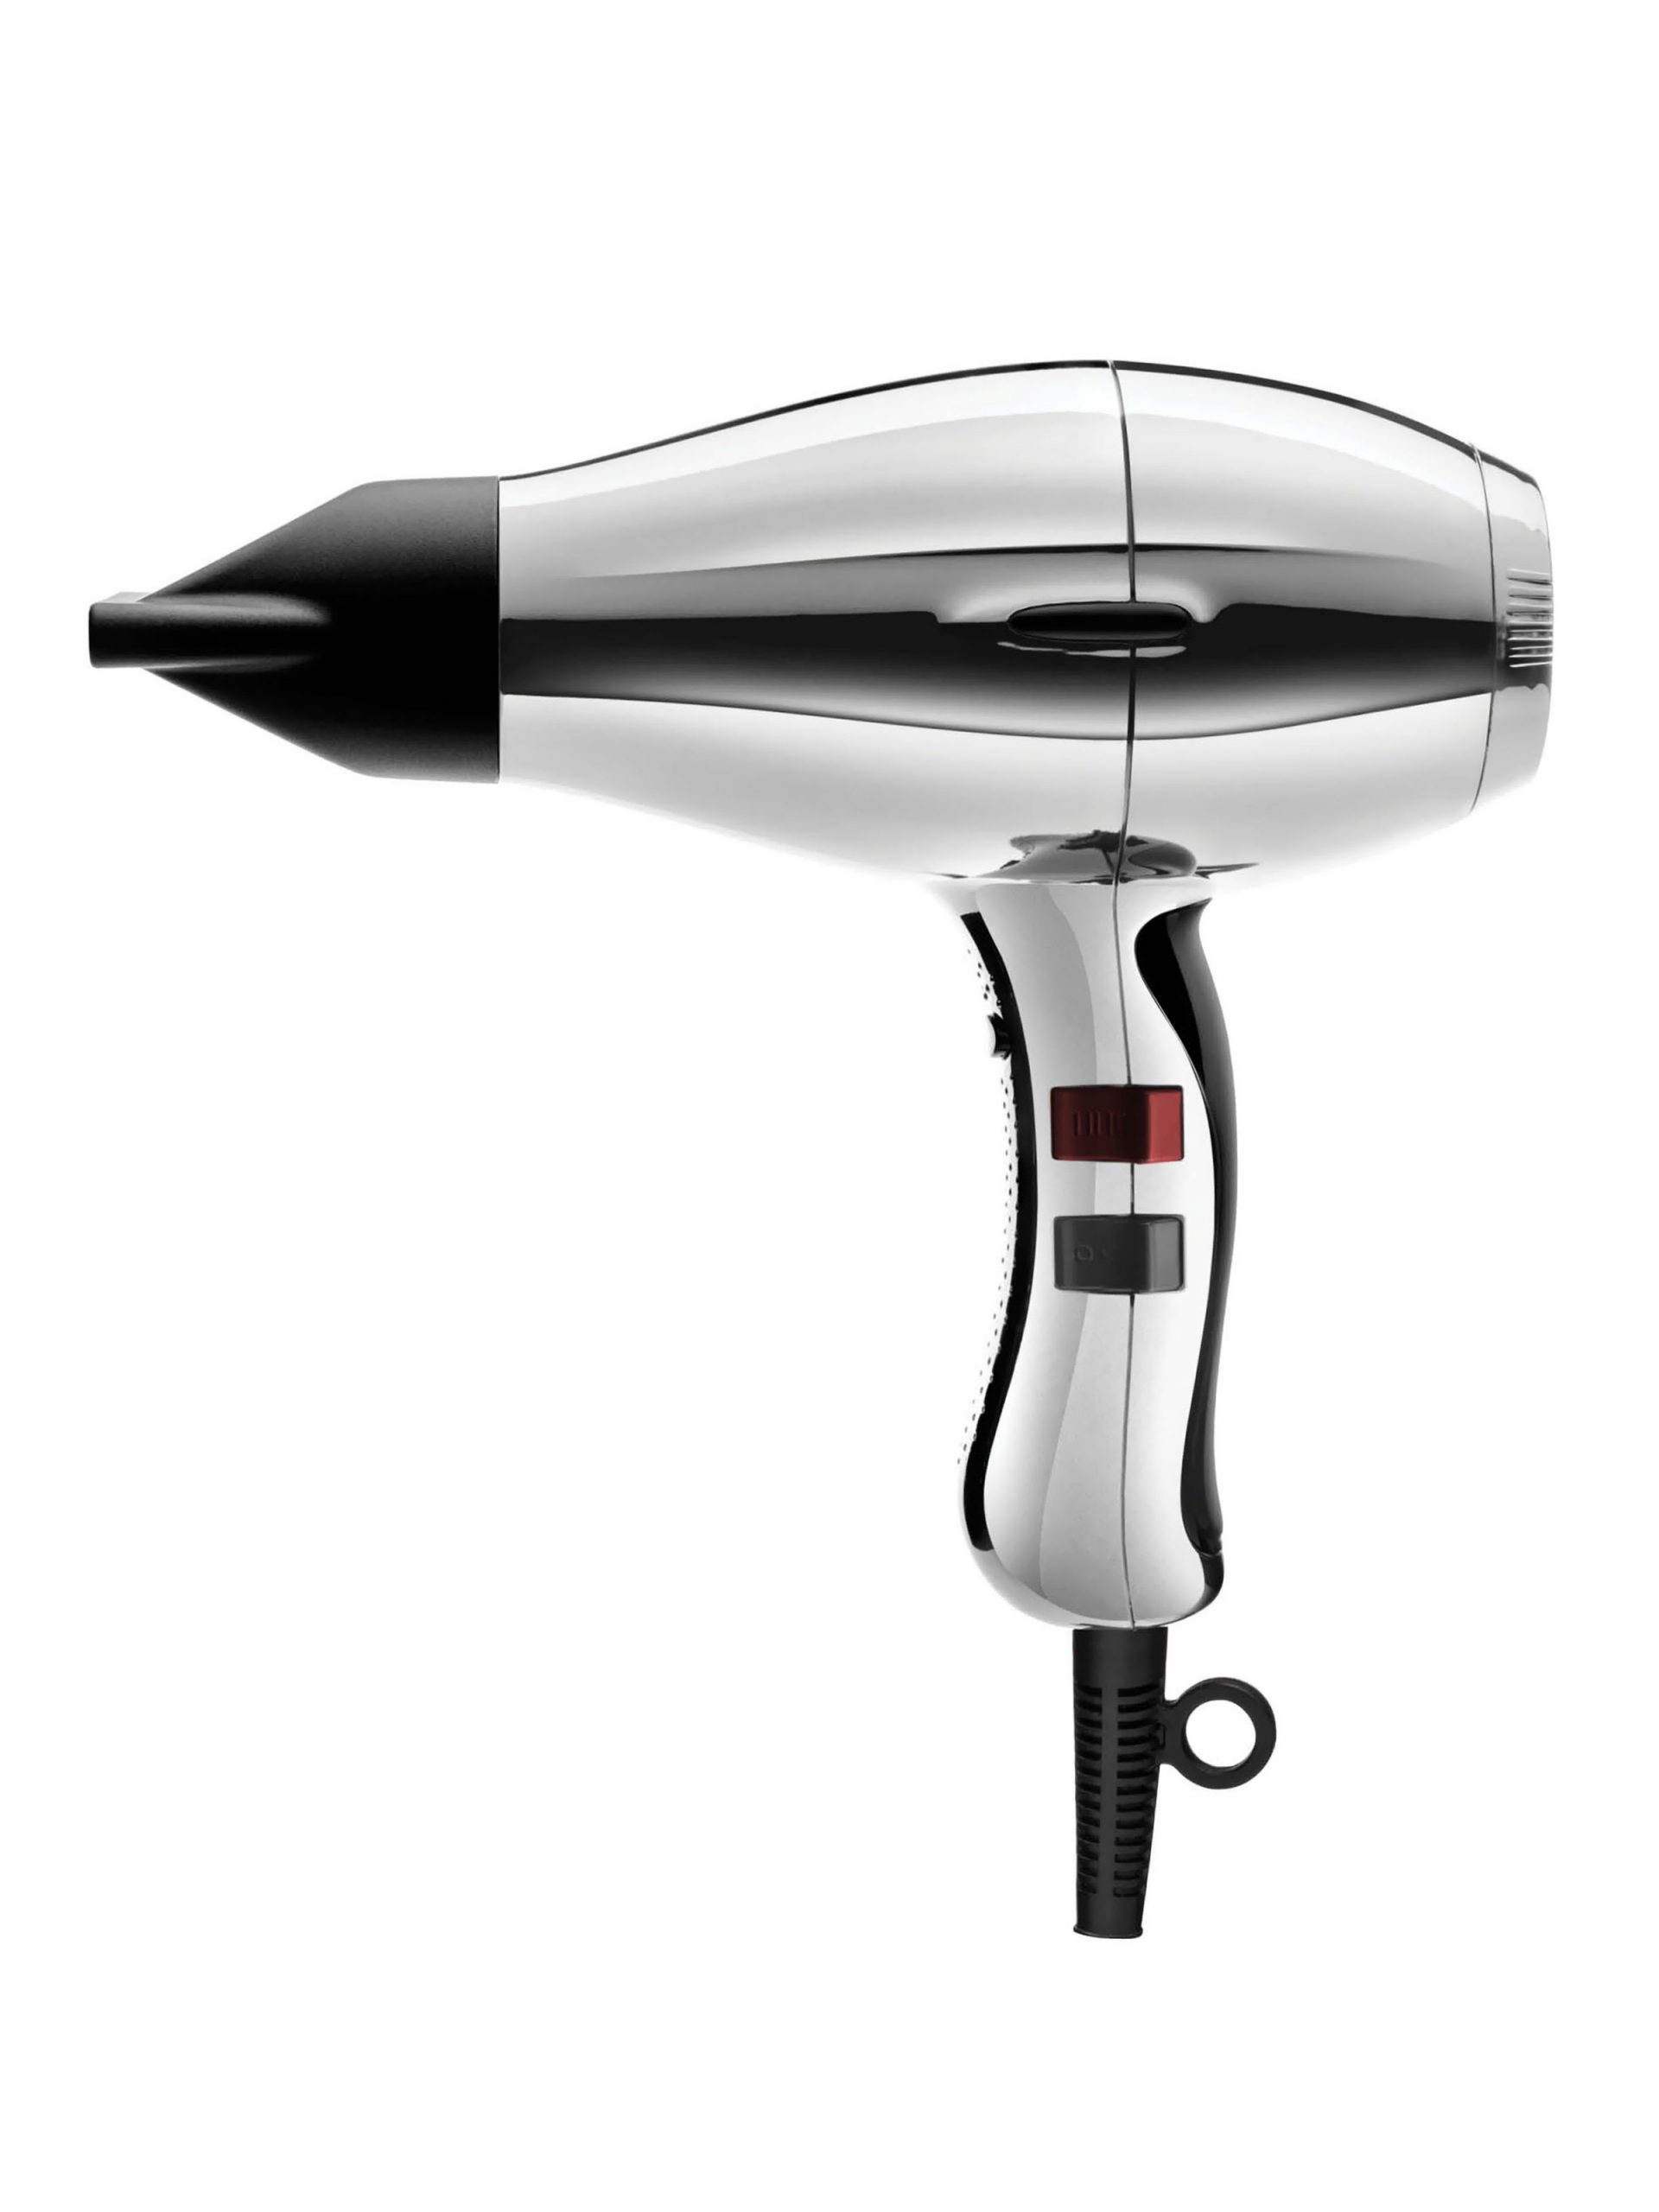 Elchim 3900 Light Ionic Hair Dryer: Professional Ceramic and Ionic Blow Dryer - 2 Concentrators Included, Fast Drying, Quiet, and Lightweight Titanium